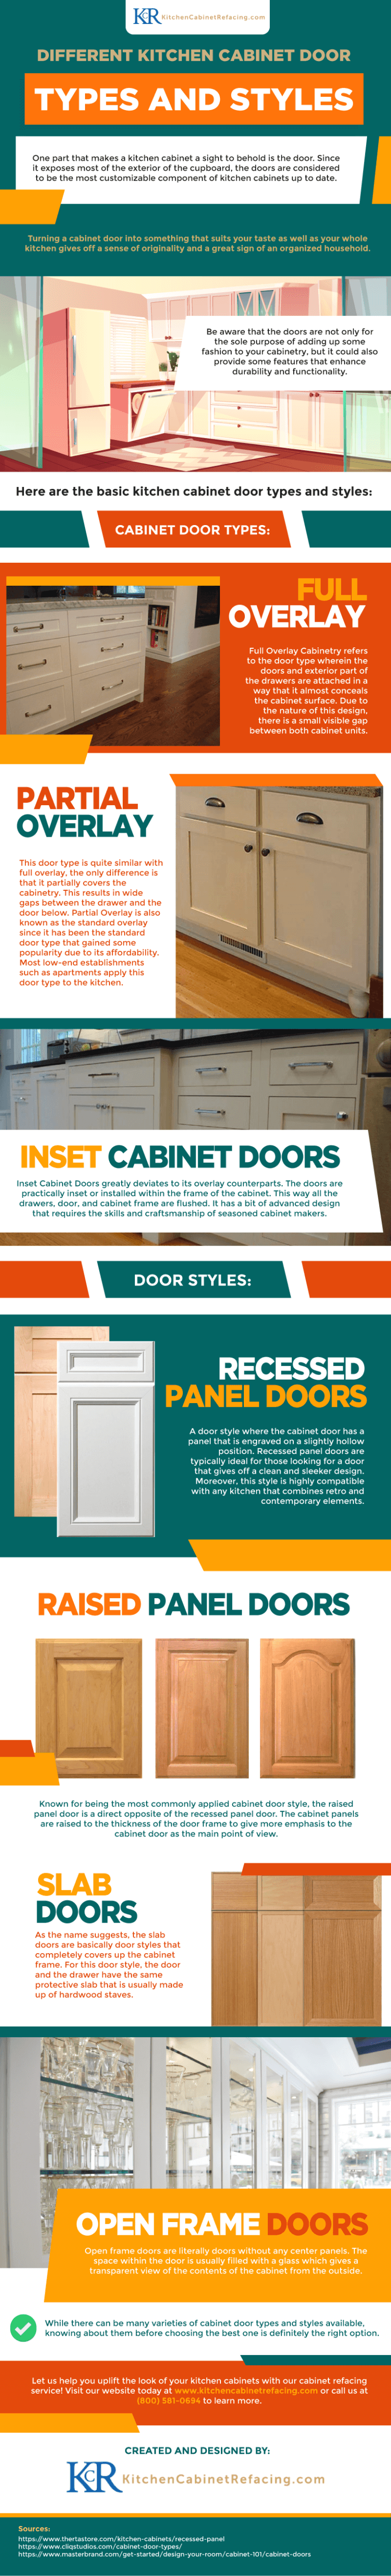 Different Kitchen Cabinet Door Types and Styles